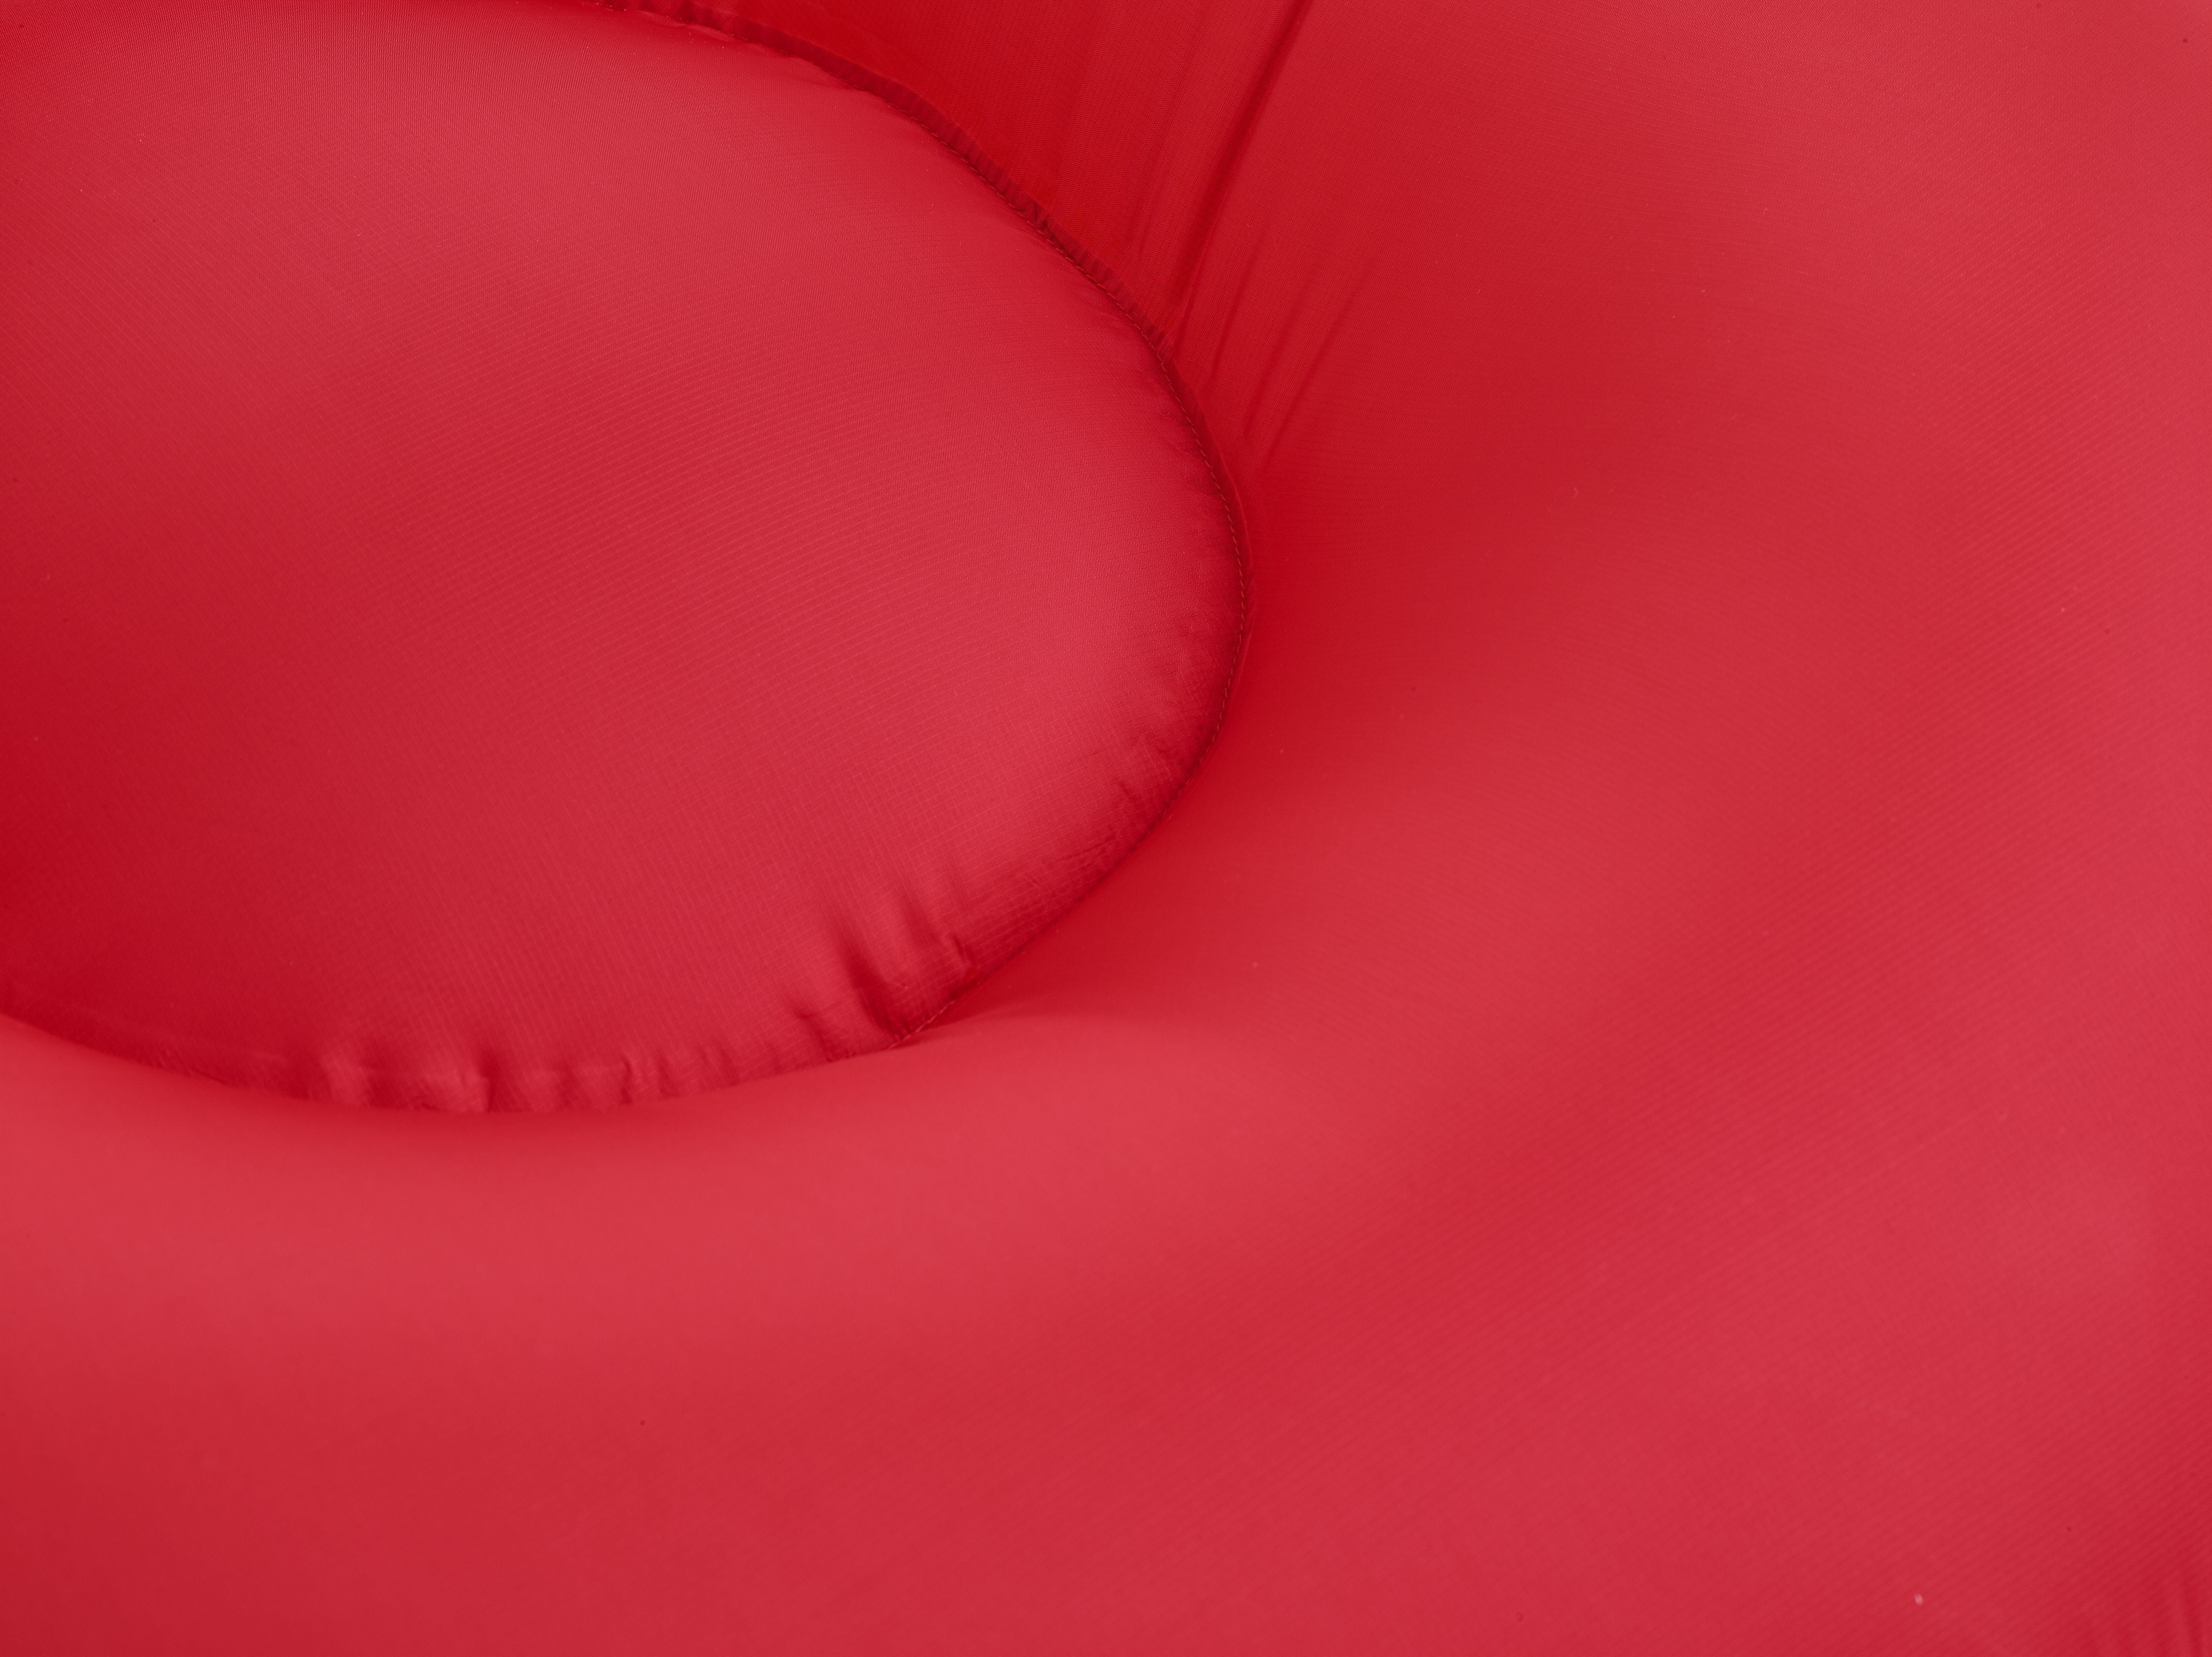 Fatboy Lamzac O Inflatable Seat 3.0, Red